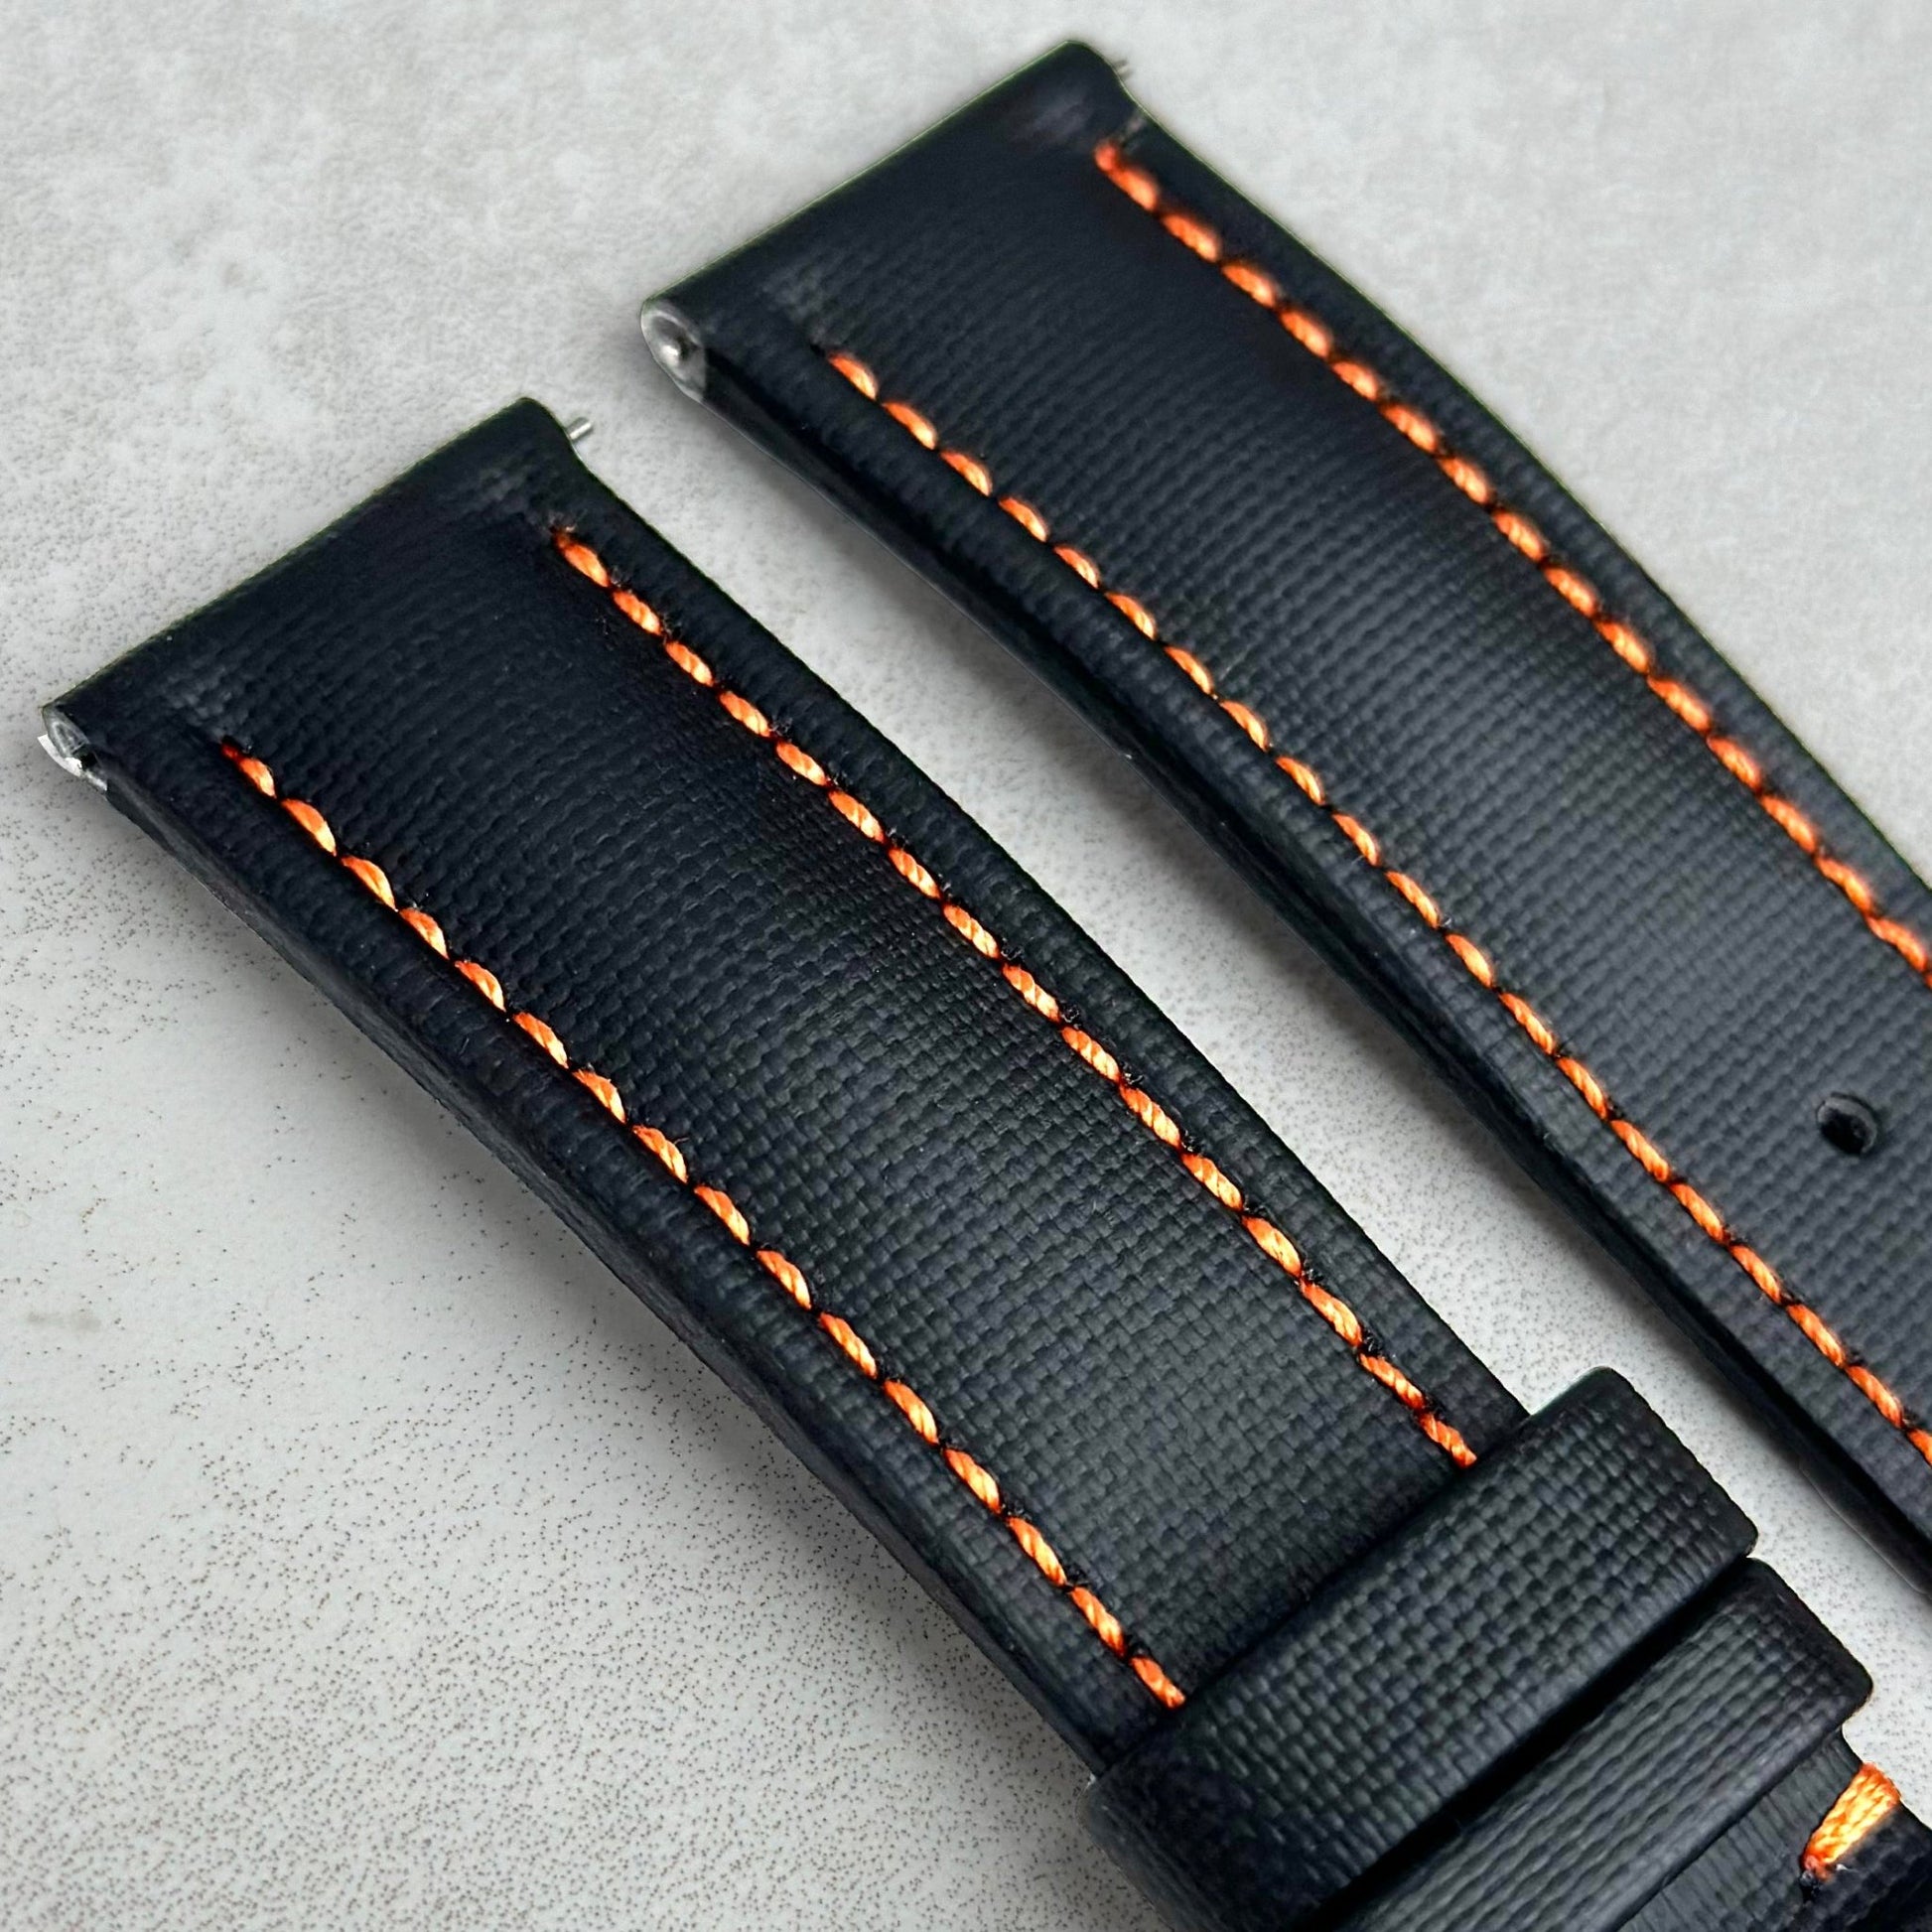 Top of the Bermuda jet black sail cloth watch strap with orange stitching. Padded sail cloth watch strap. Watch And Strap